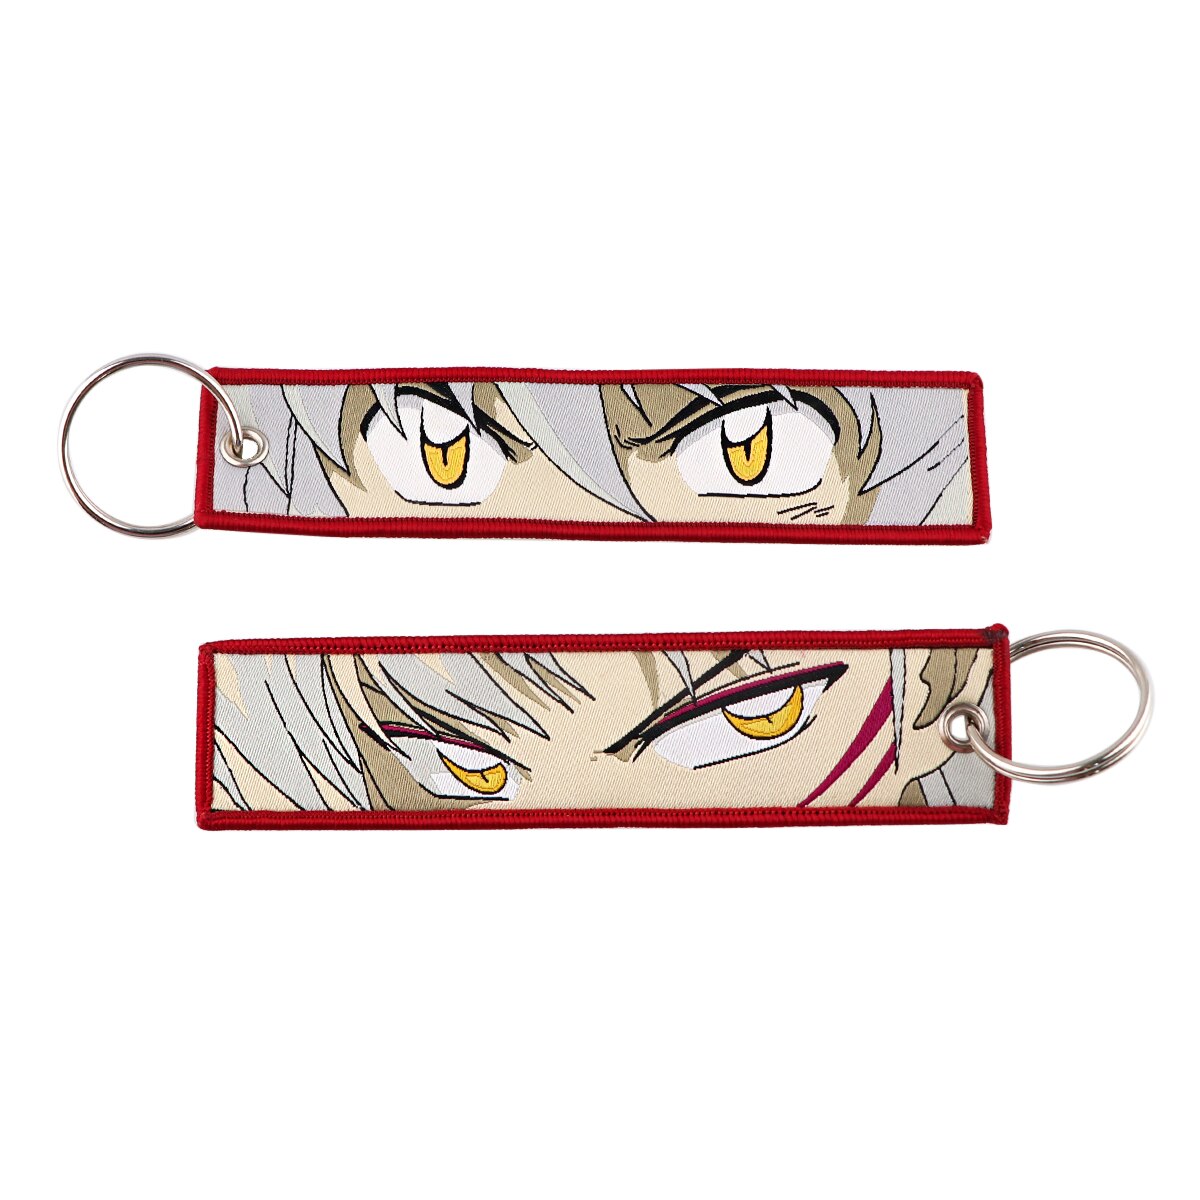 Japanese Anime INUYASHA Cool Key Tag Embroidery Key Fobs For Motorcycles Cars Bag Backpack Keychain Fashion Key Ring Gifts